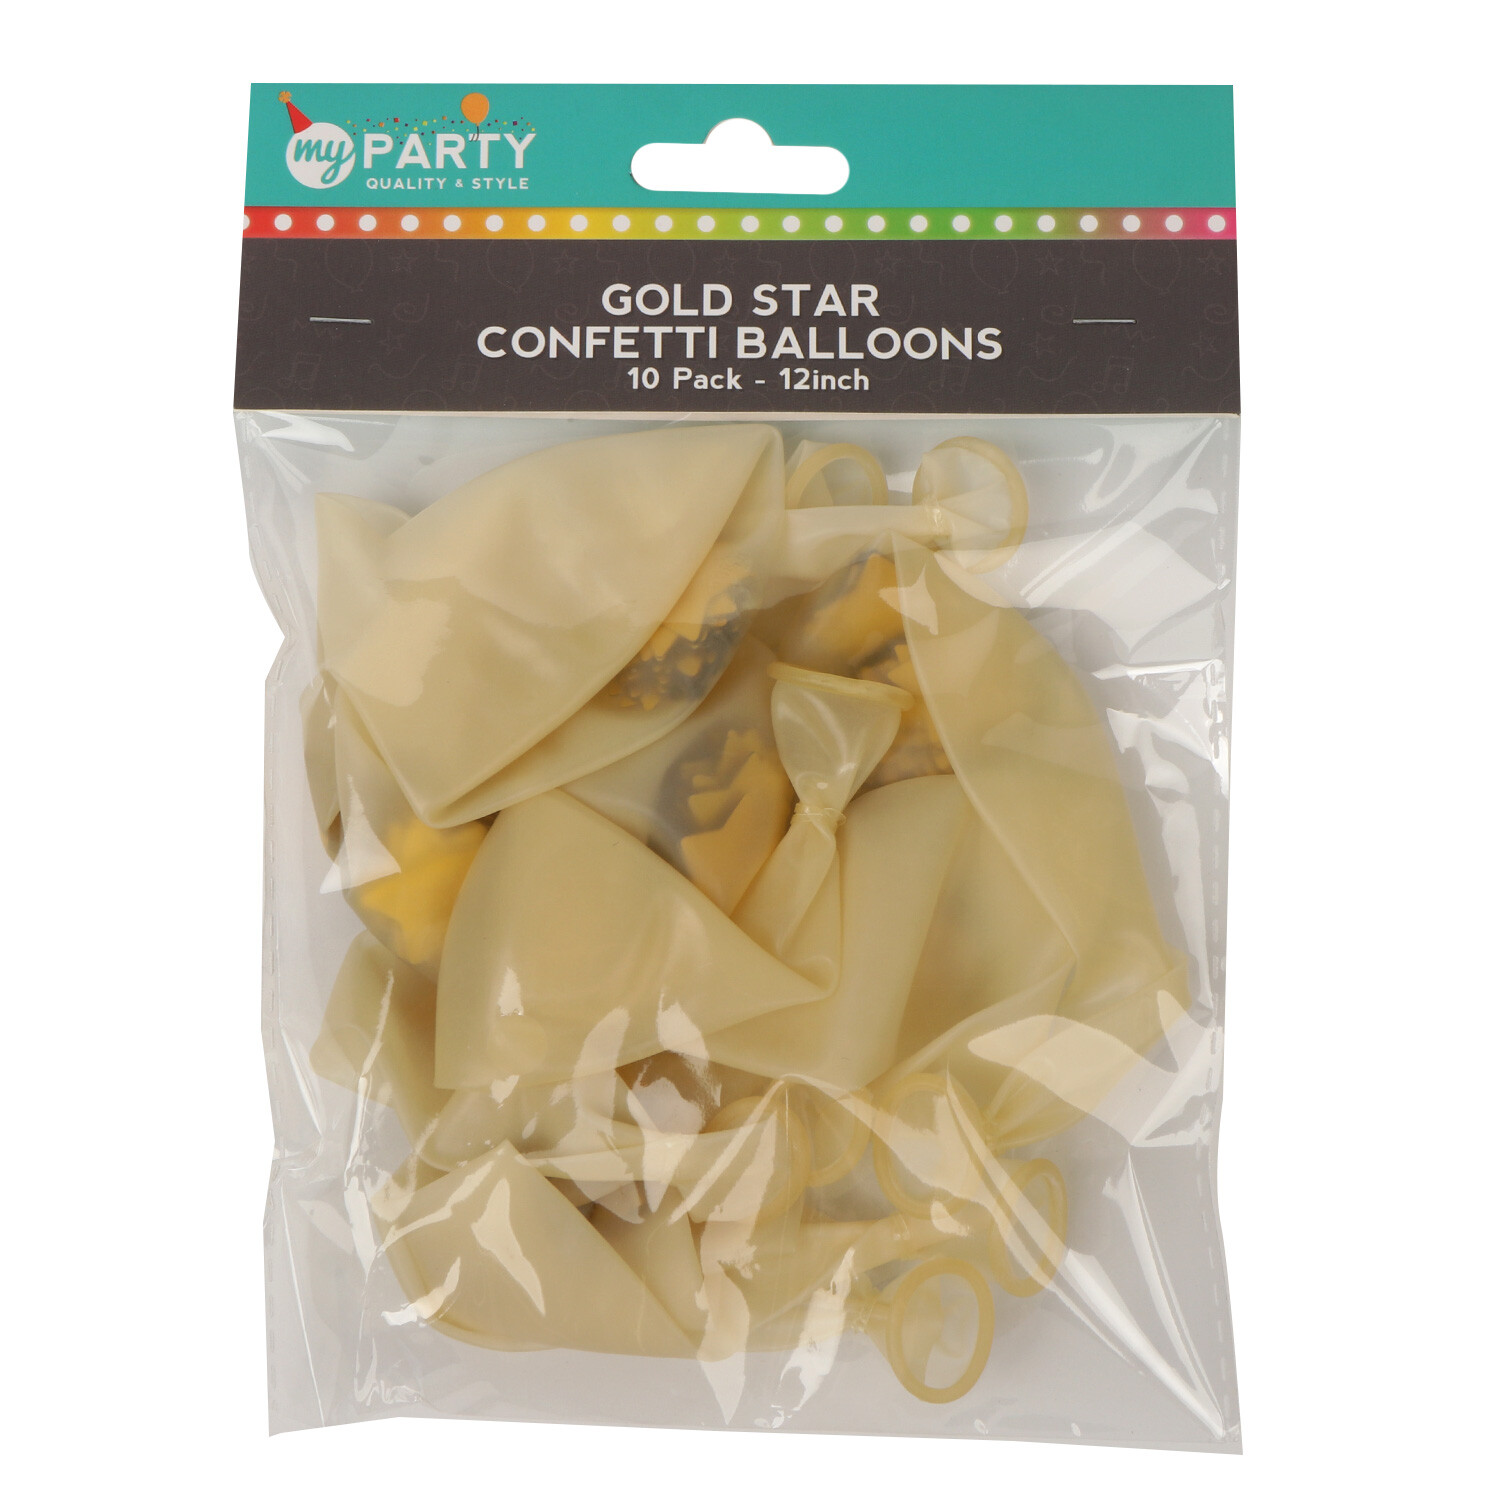 Pack of 10 Star Confetti Balloons - Gold Image